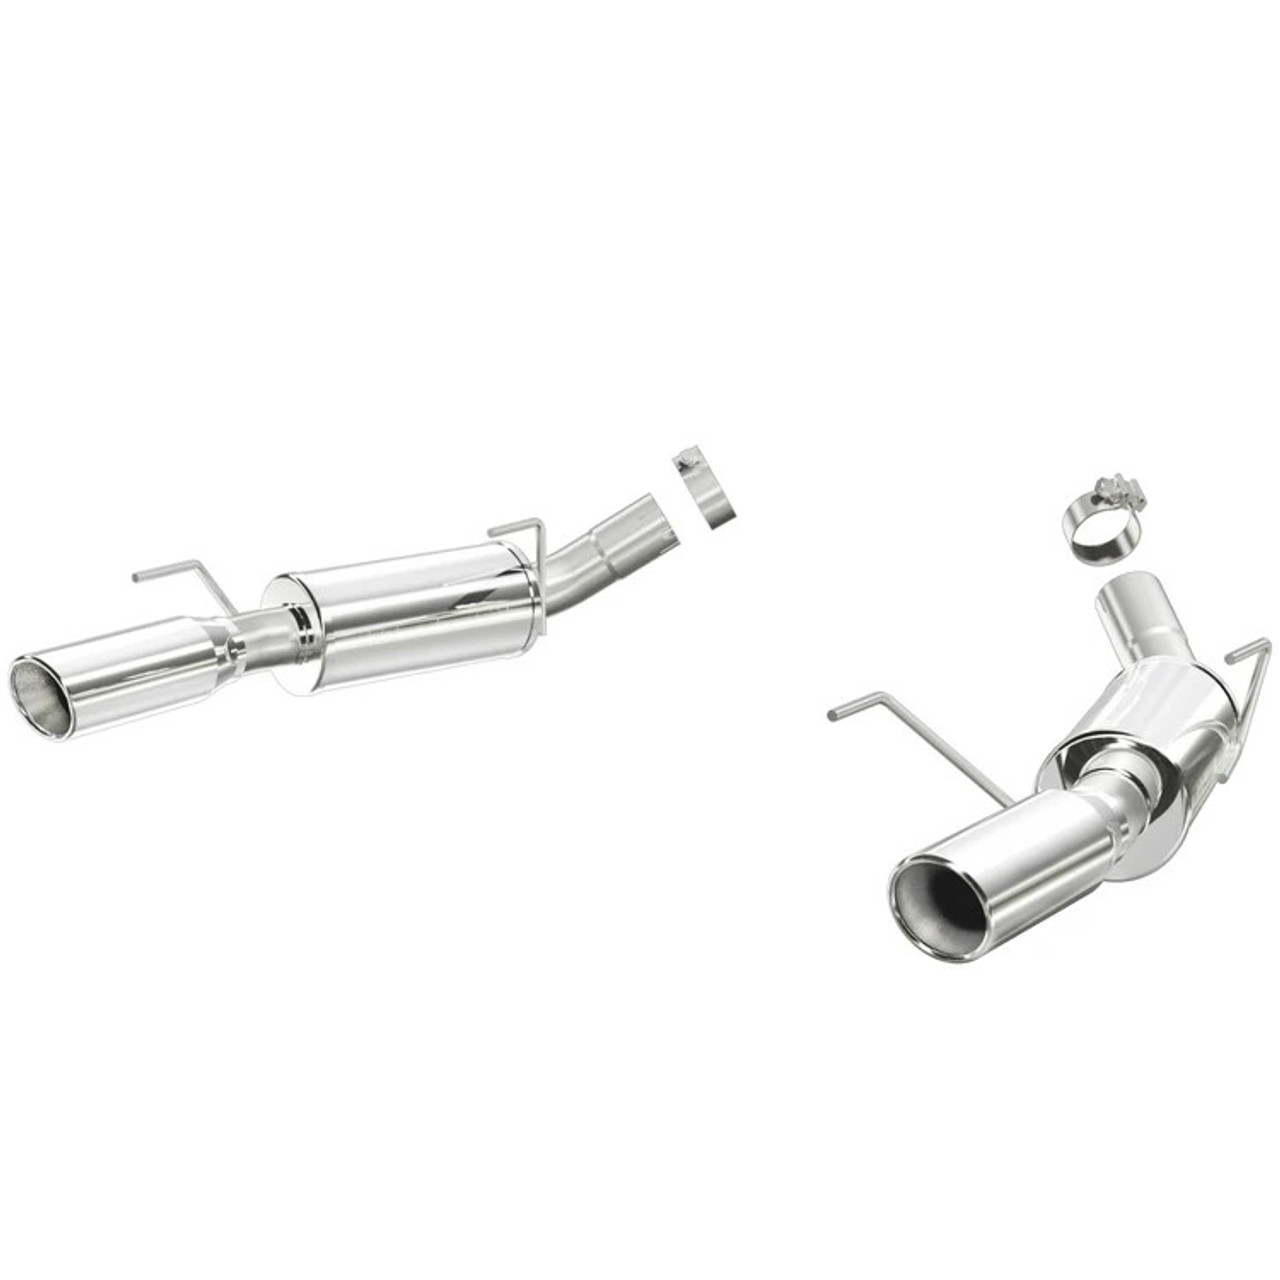 MagnaFlow Sys C/B 05-09 Mustang M-pack axle-bac (PN: 16793)